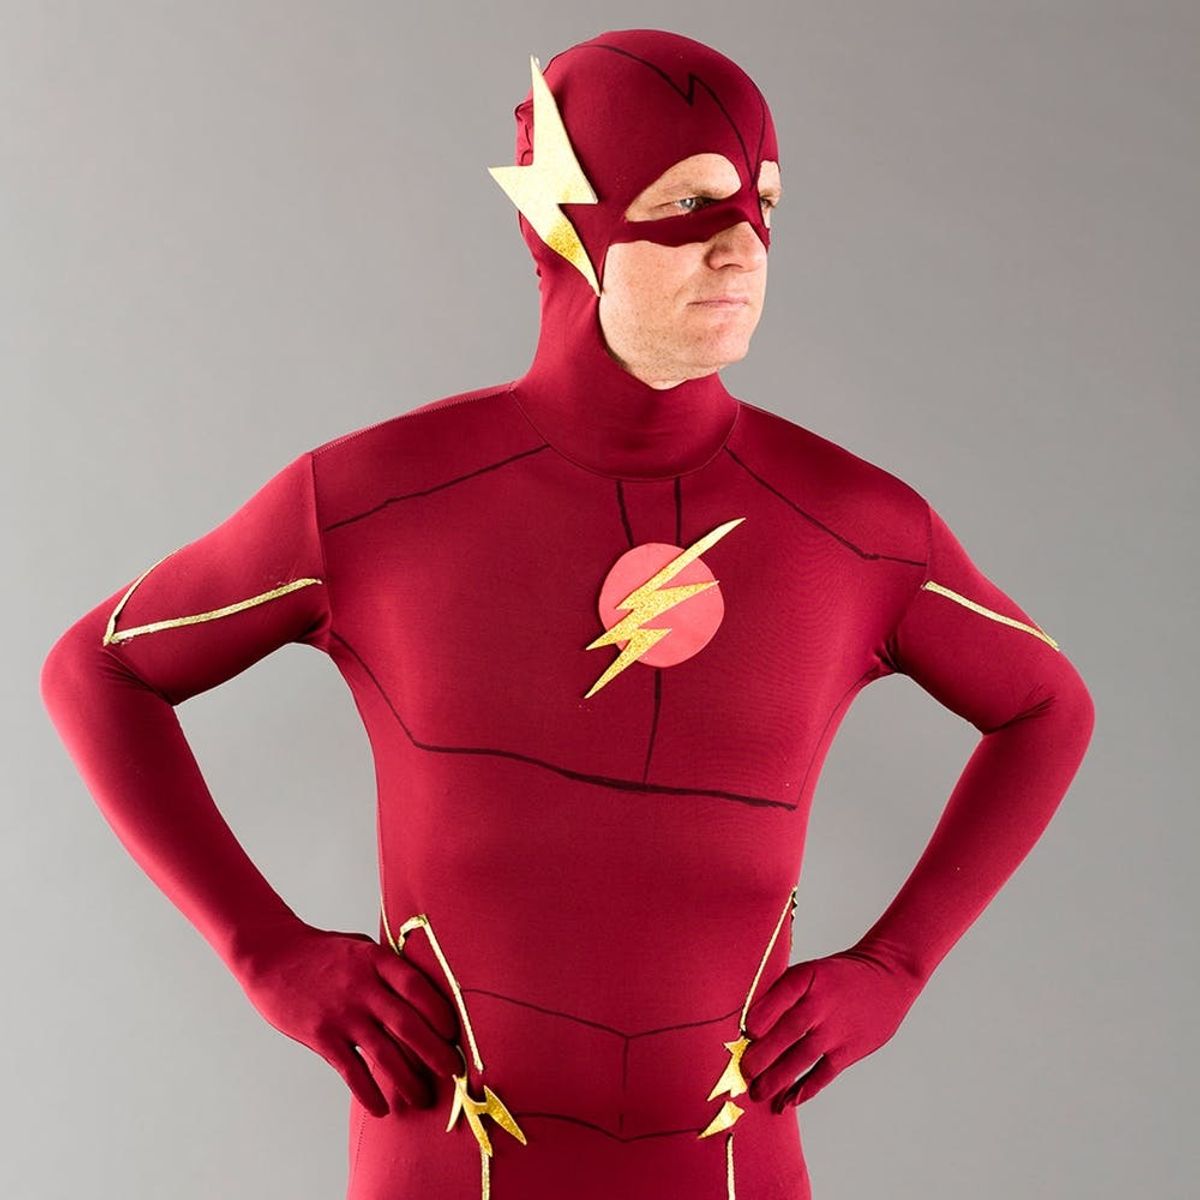 Live Out Your Superhero Dreams With Our The Flash Halloween Costume